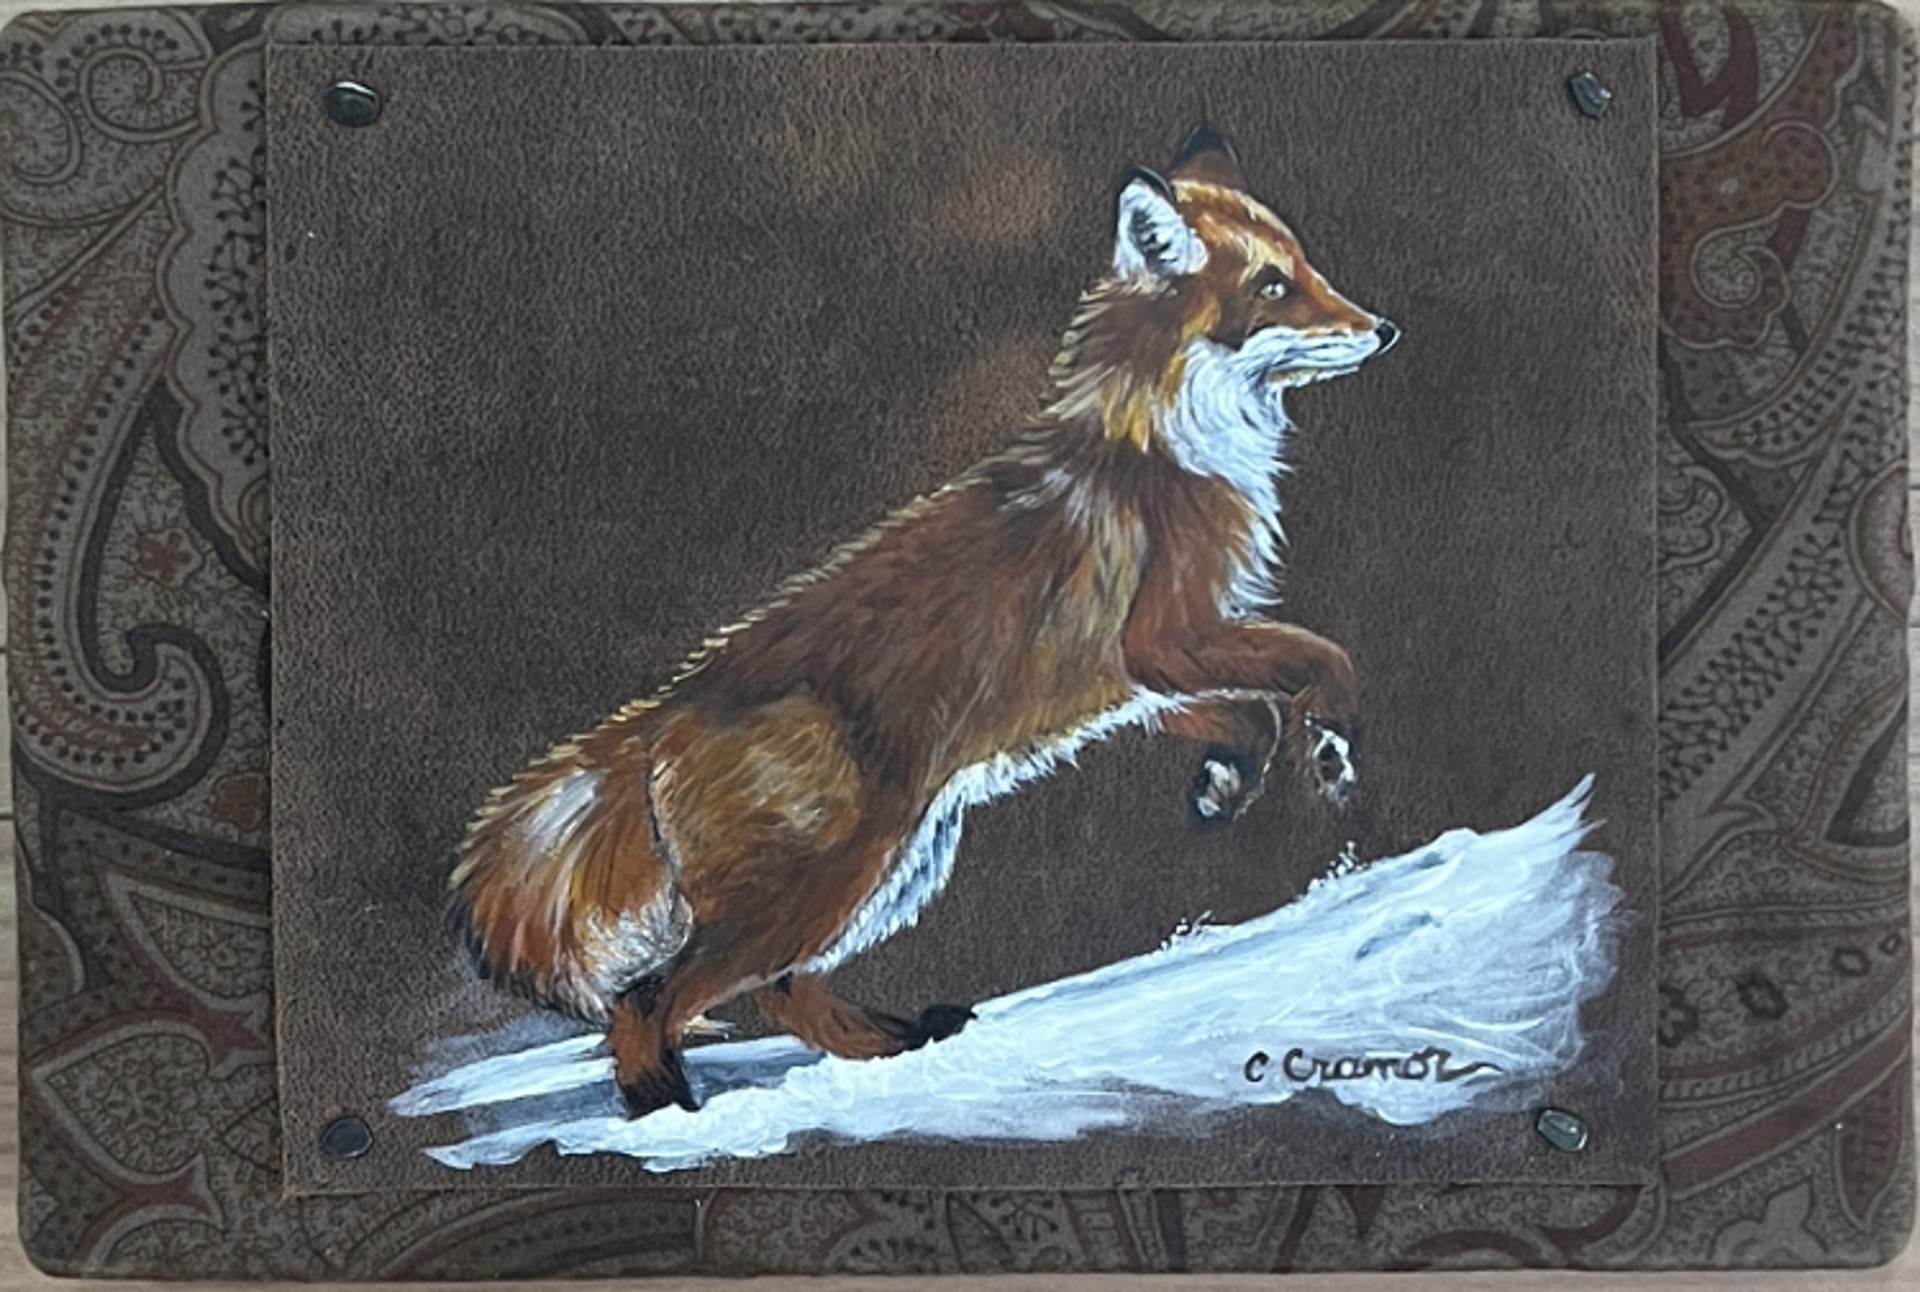 Fox Trot by Cindy Cranor